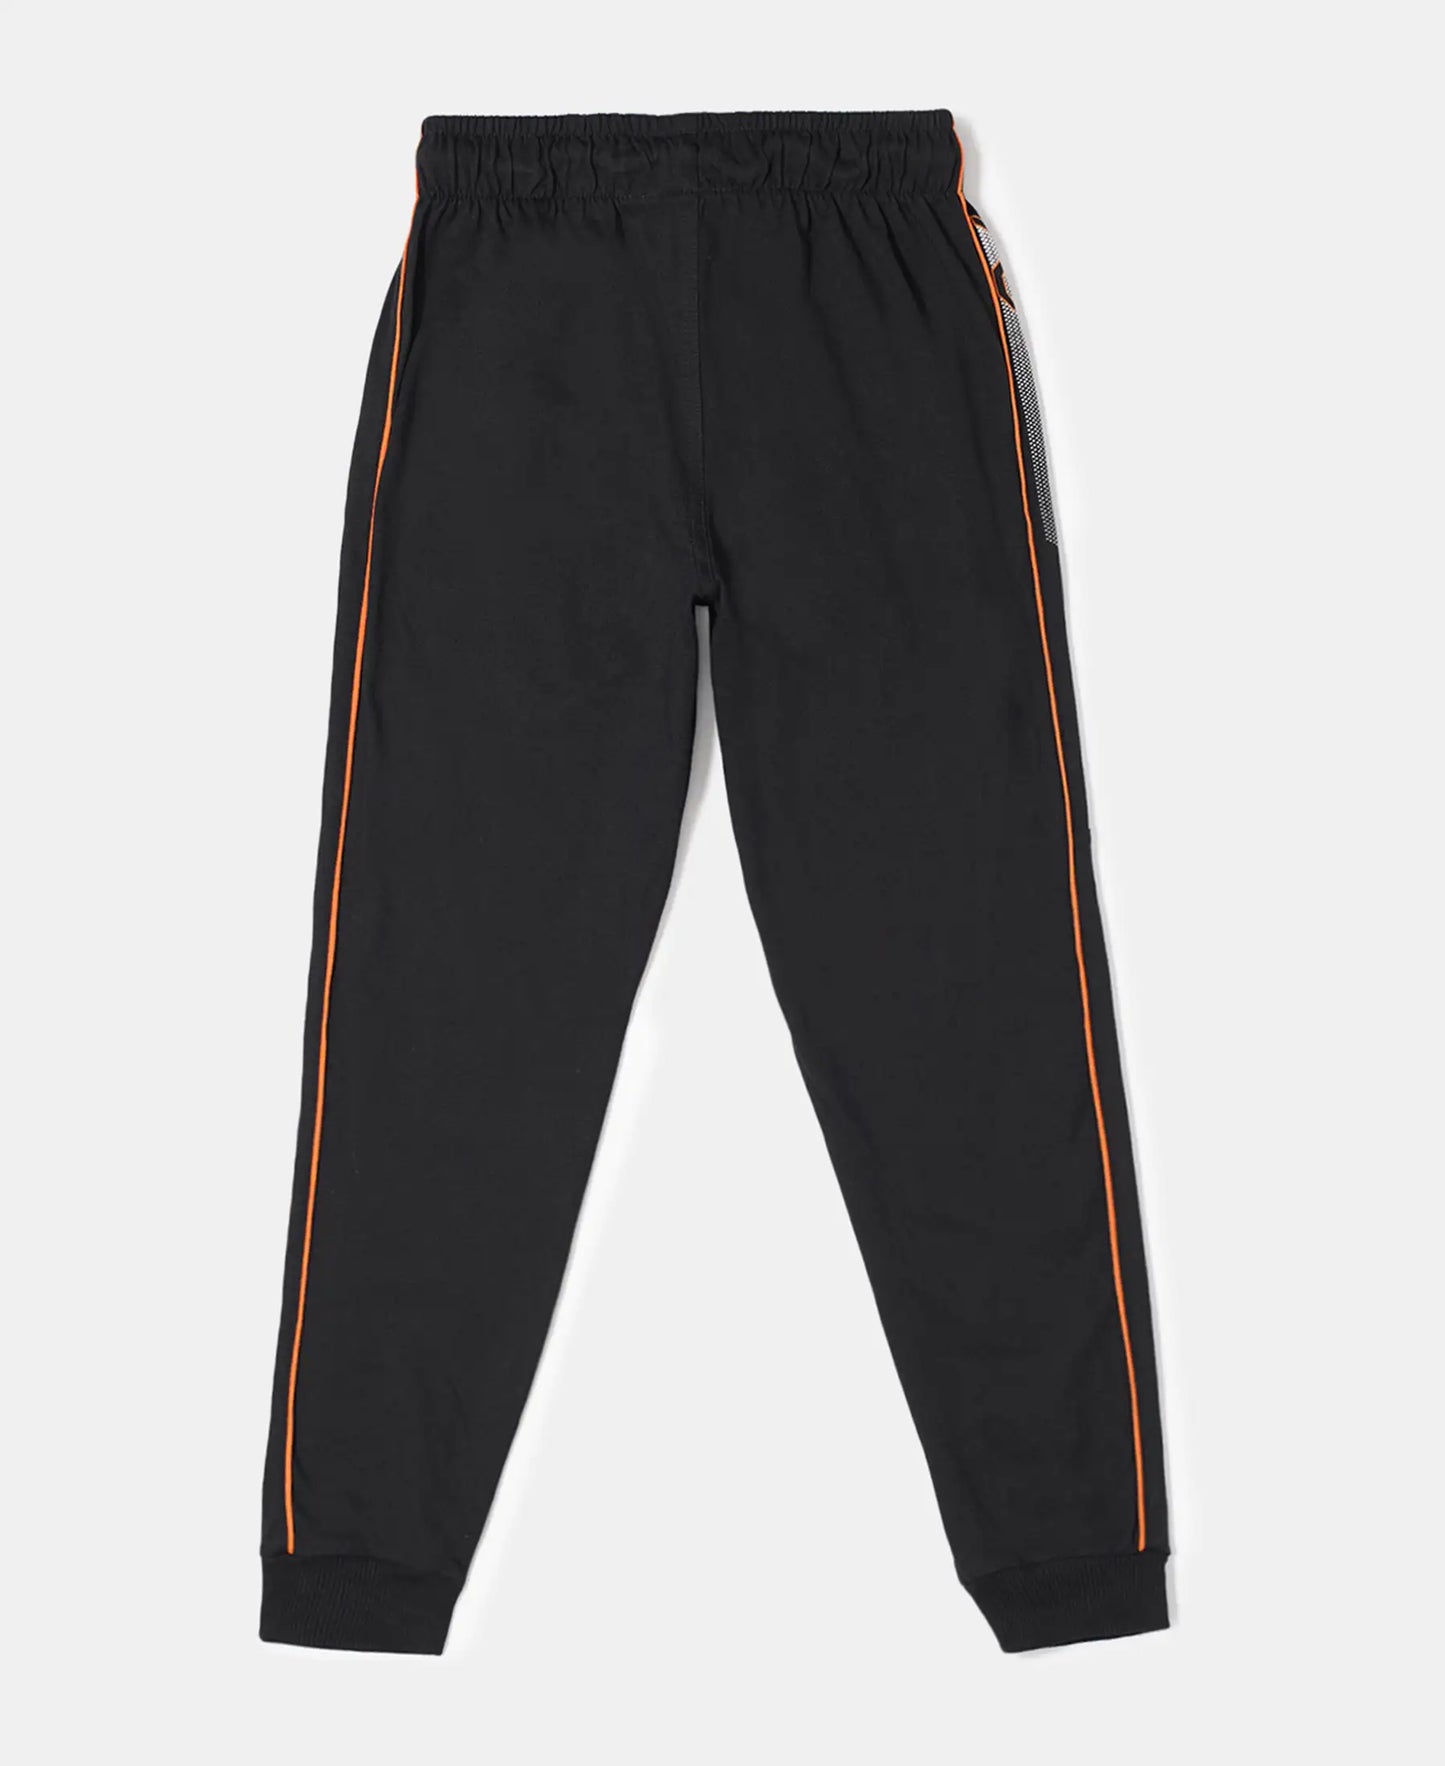 Super Combed Cotton Rich Graphic Printed Joggers with Ribbed Cuff Hem - Black & Golden Poppy-2